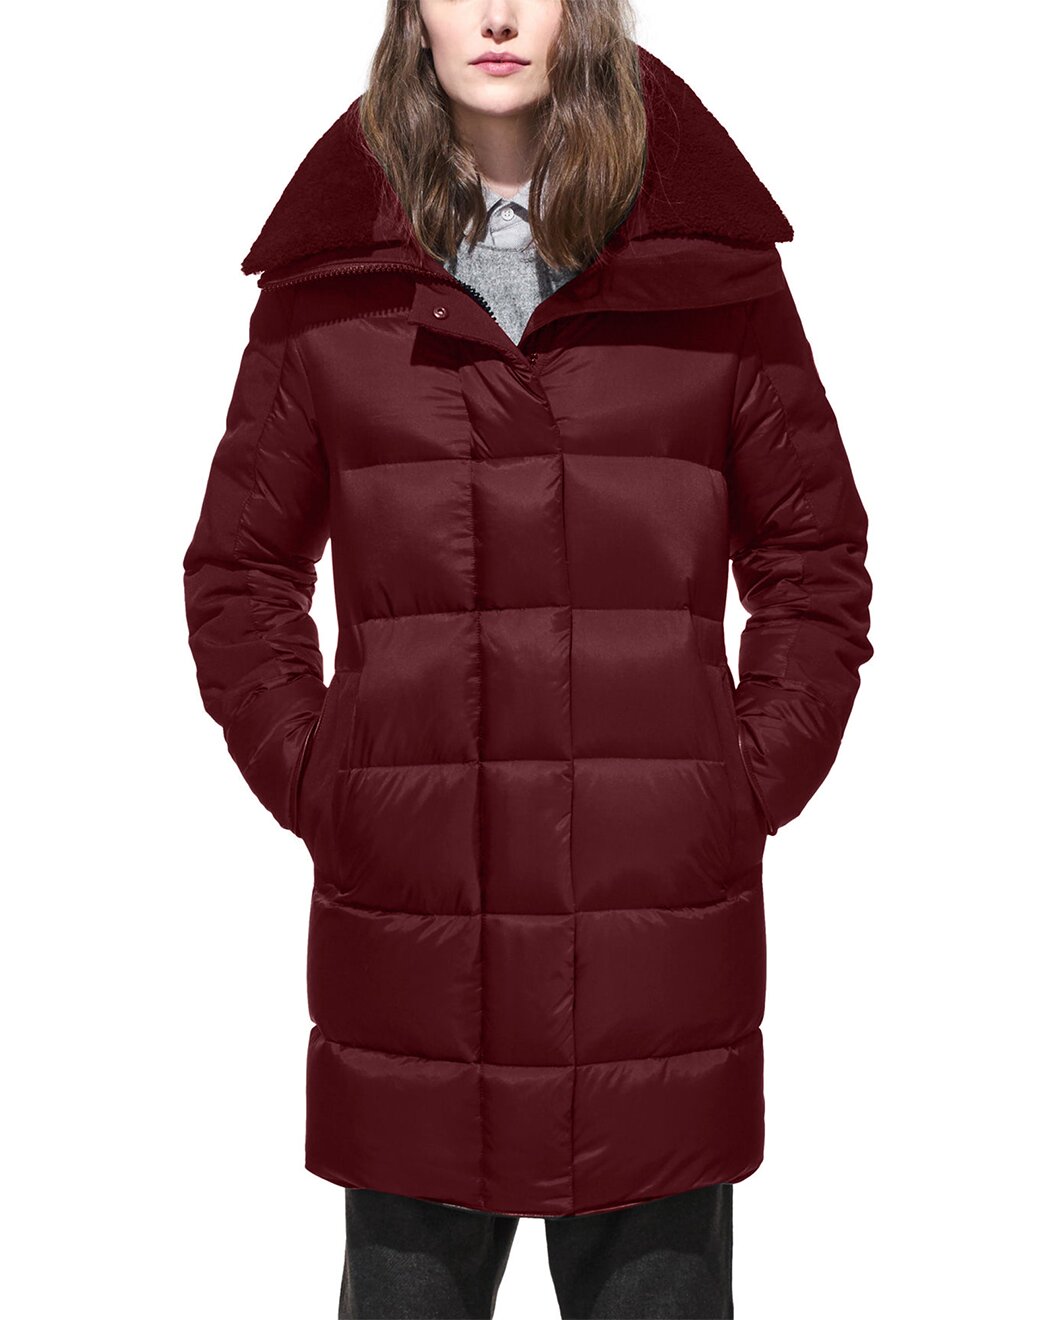 Bundle Up in These Canada Goose Winter Coats — 20% Off | UsWeekly